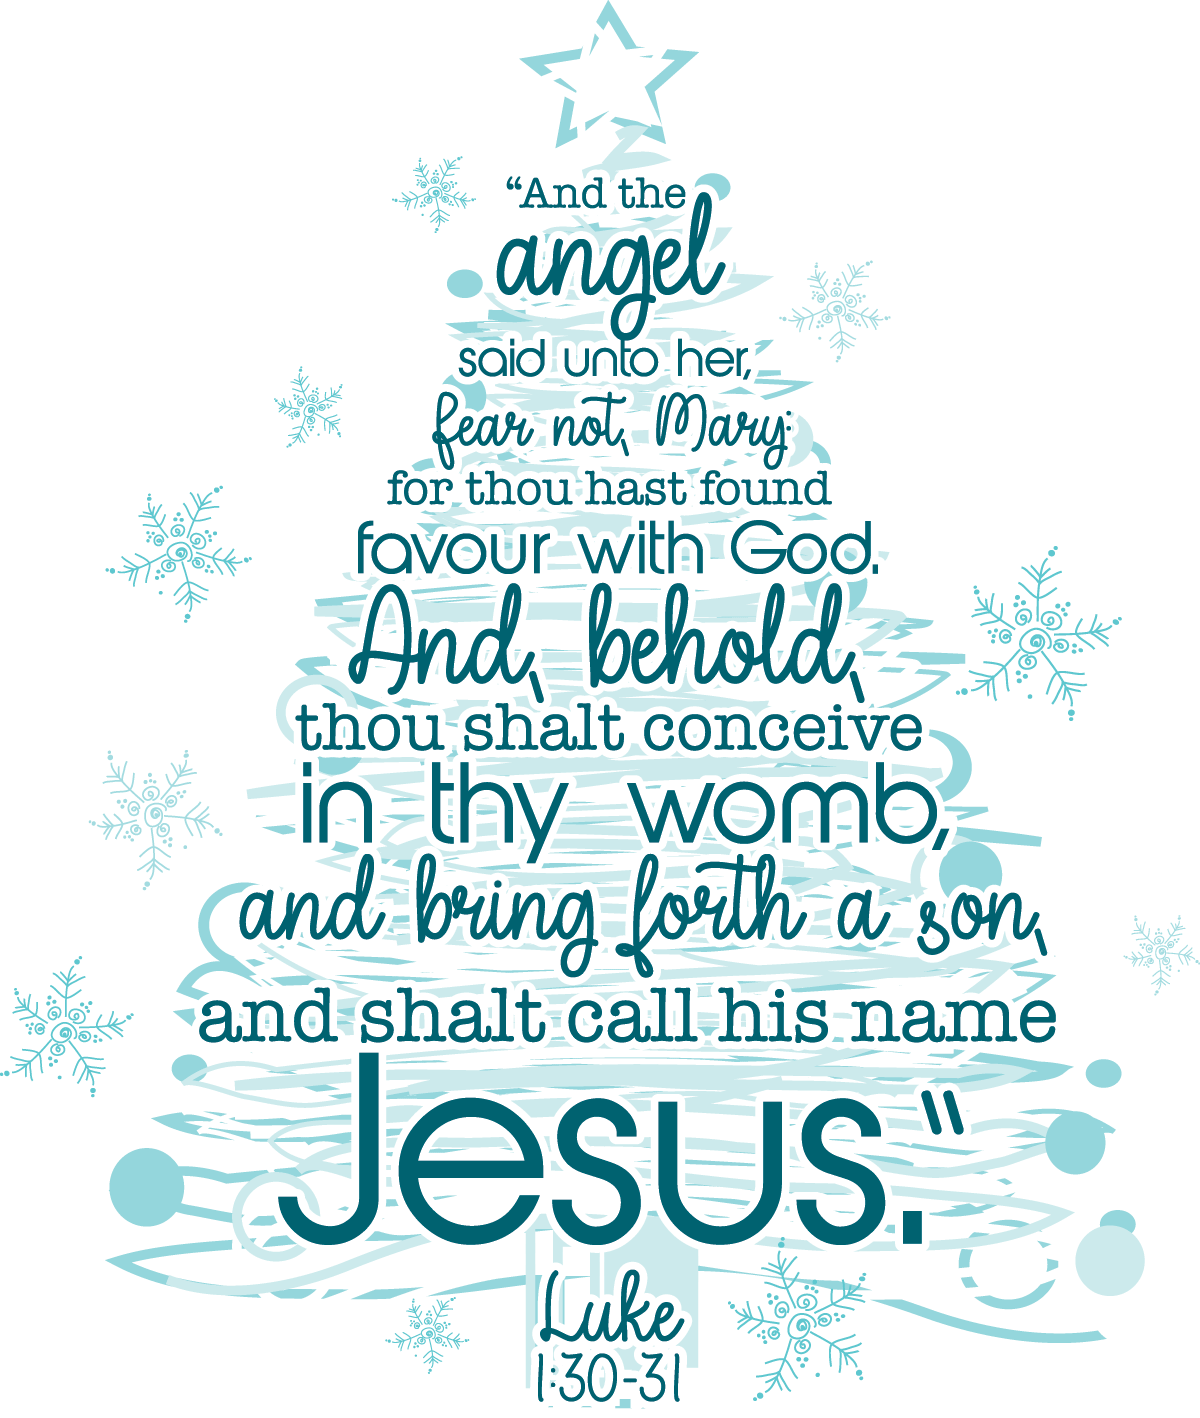 And the angel said unto her, fear not, Mary for thou hast found favour with God. And behold, thou shalt conceive in they womb, and bring forth a son, and shalt call his name Jesus. Luke 1:30-31